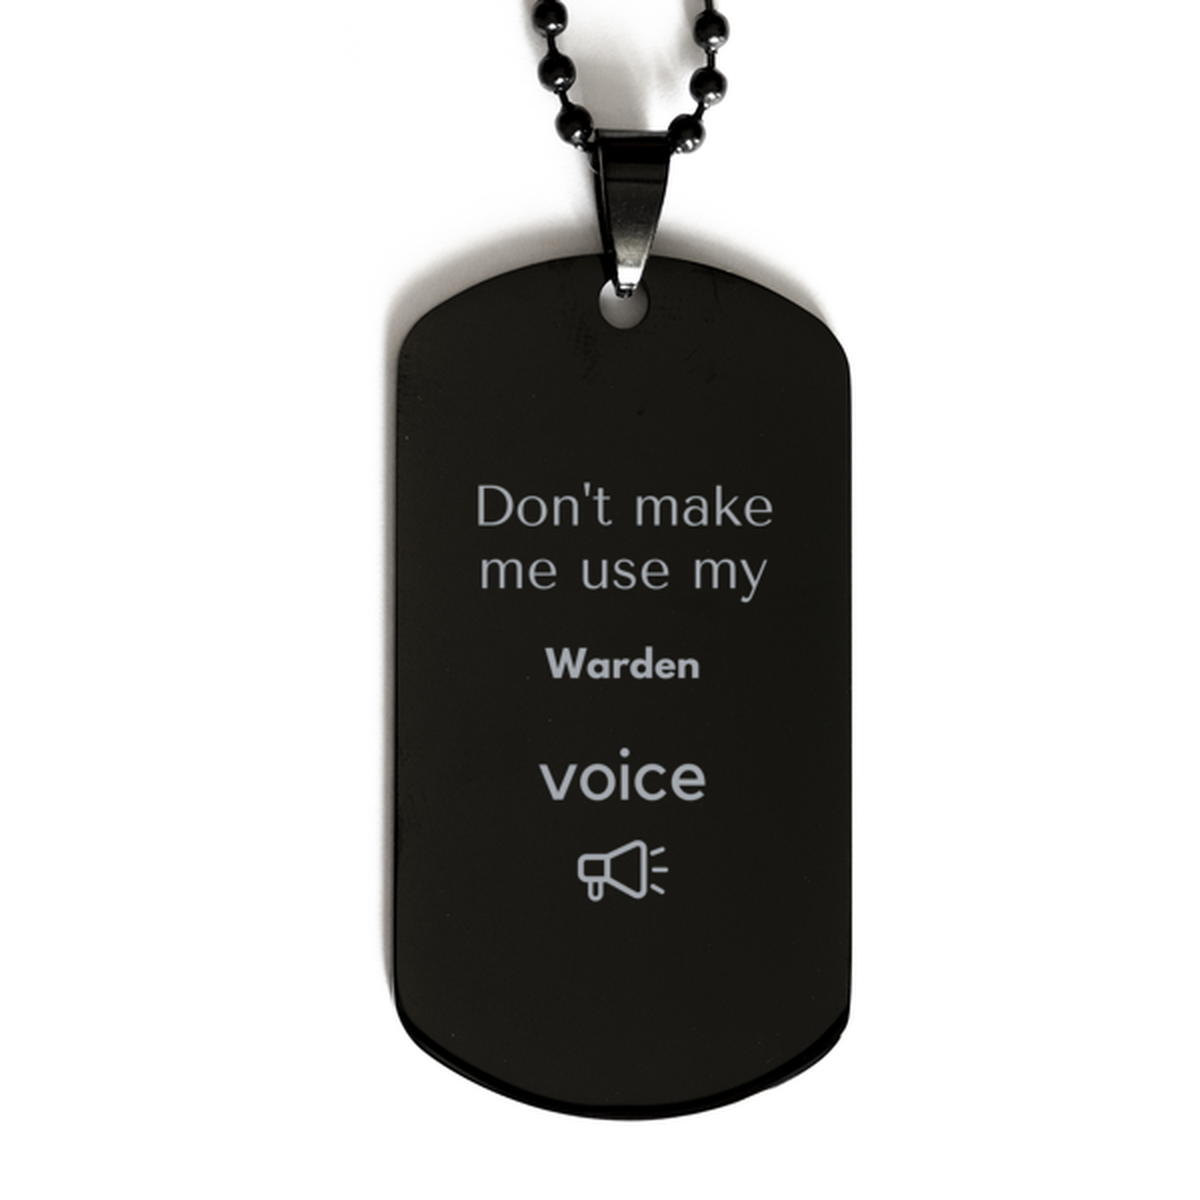 Don't make me use my Warden voice, Sarcasm Warden Gifts, Christmas Warden Black Dog Tag Birthday Unique Gifts For Warden Coworkers, Men, Women, Colleague, Friends